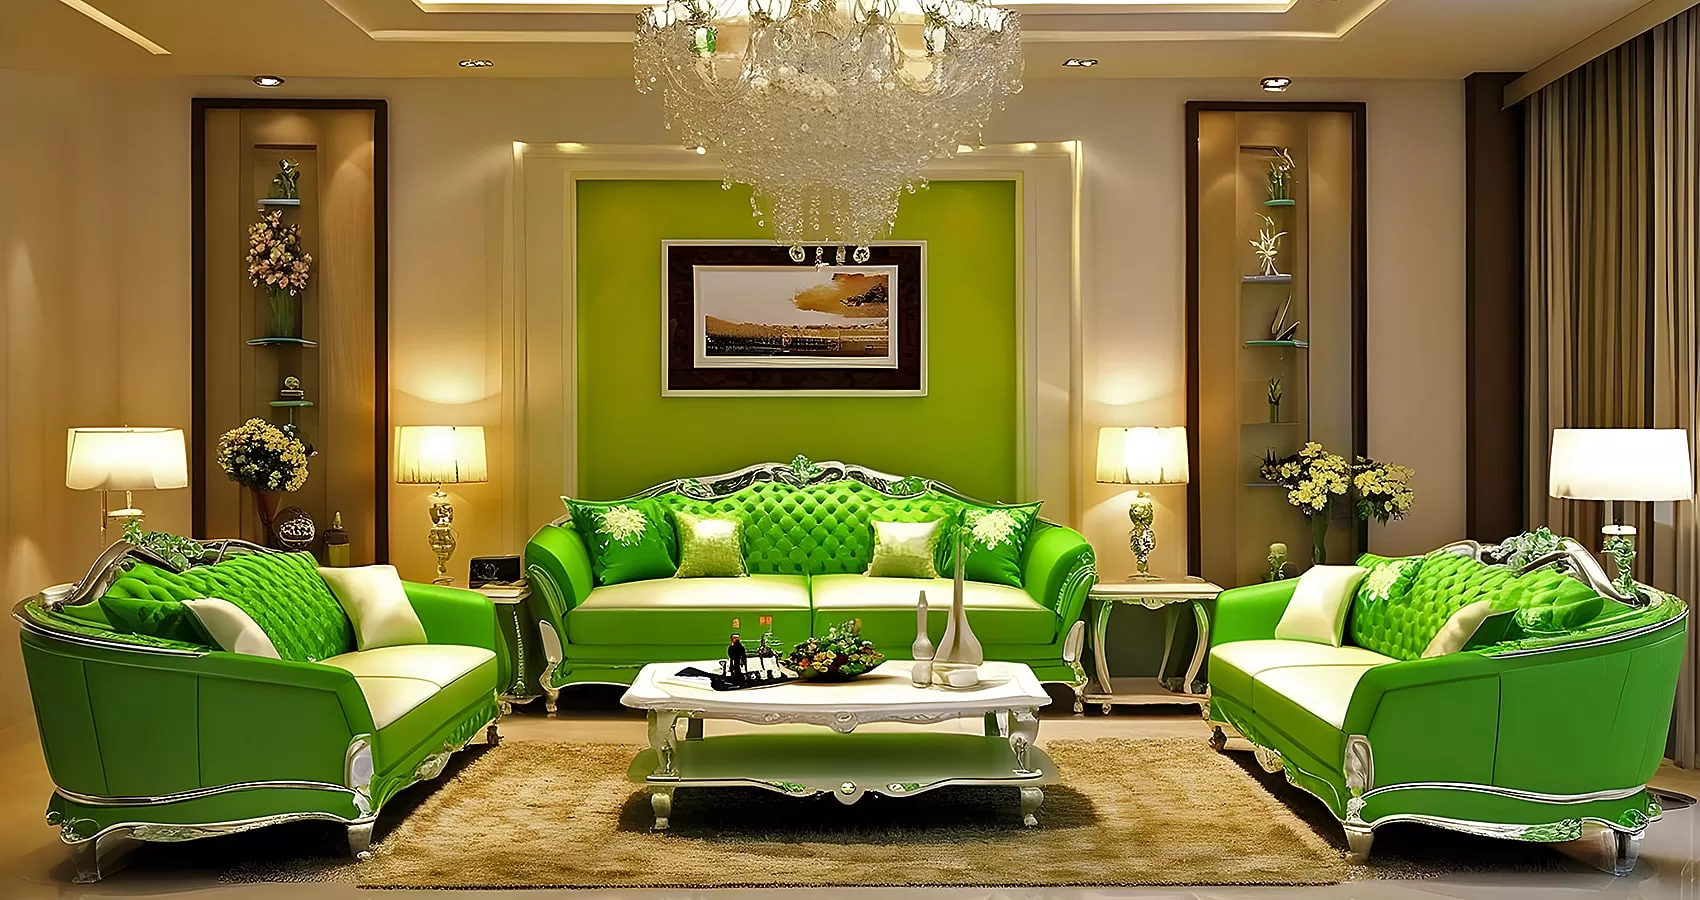 Green Couch Living Rooms | Green Sofa Living Room | Green Couch Living Room | Living Room Ideas Green Couch